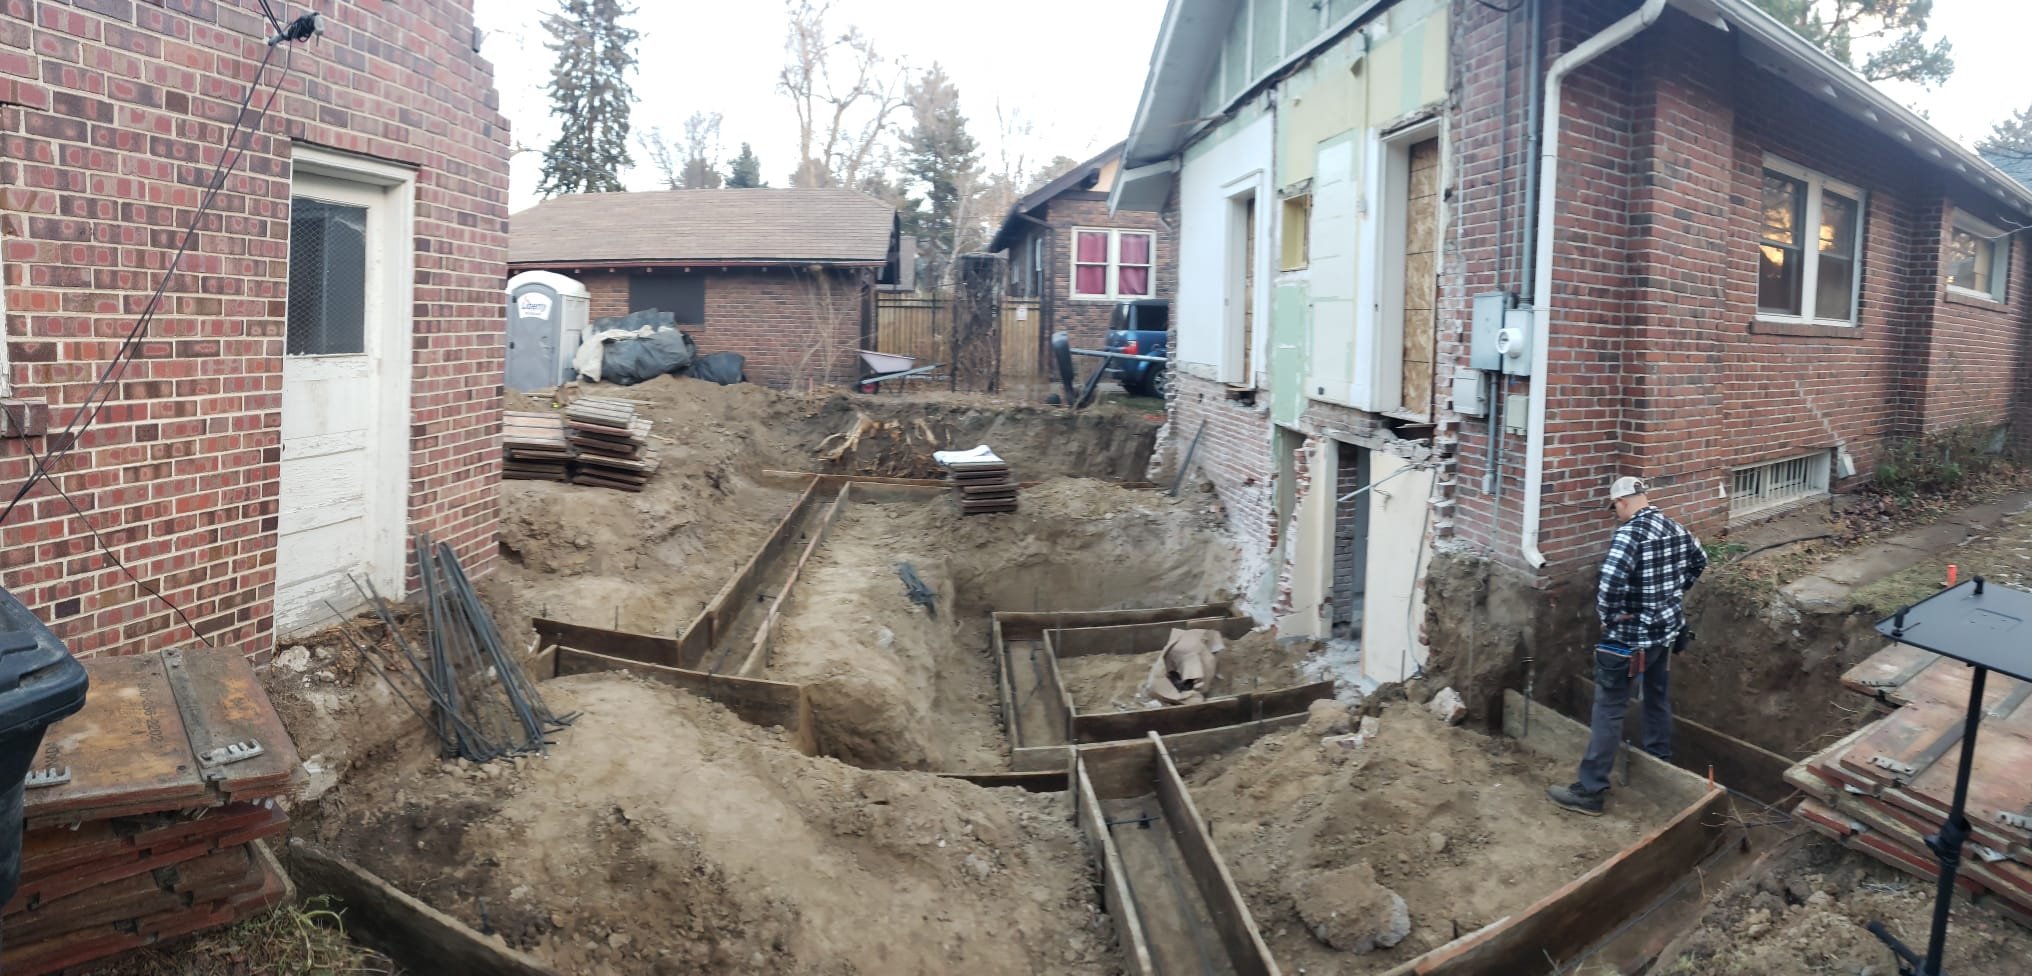 Excavation has begun for the future basement connecting element